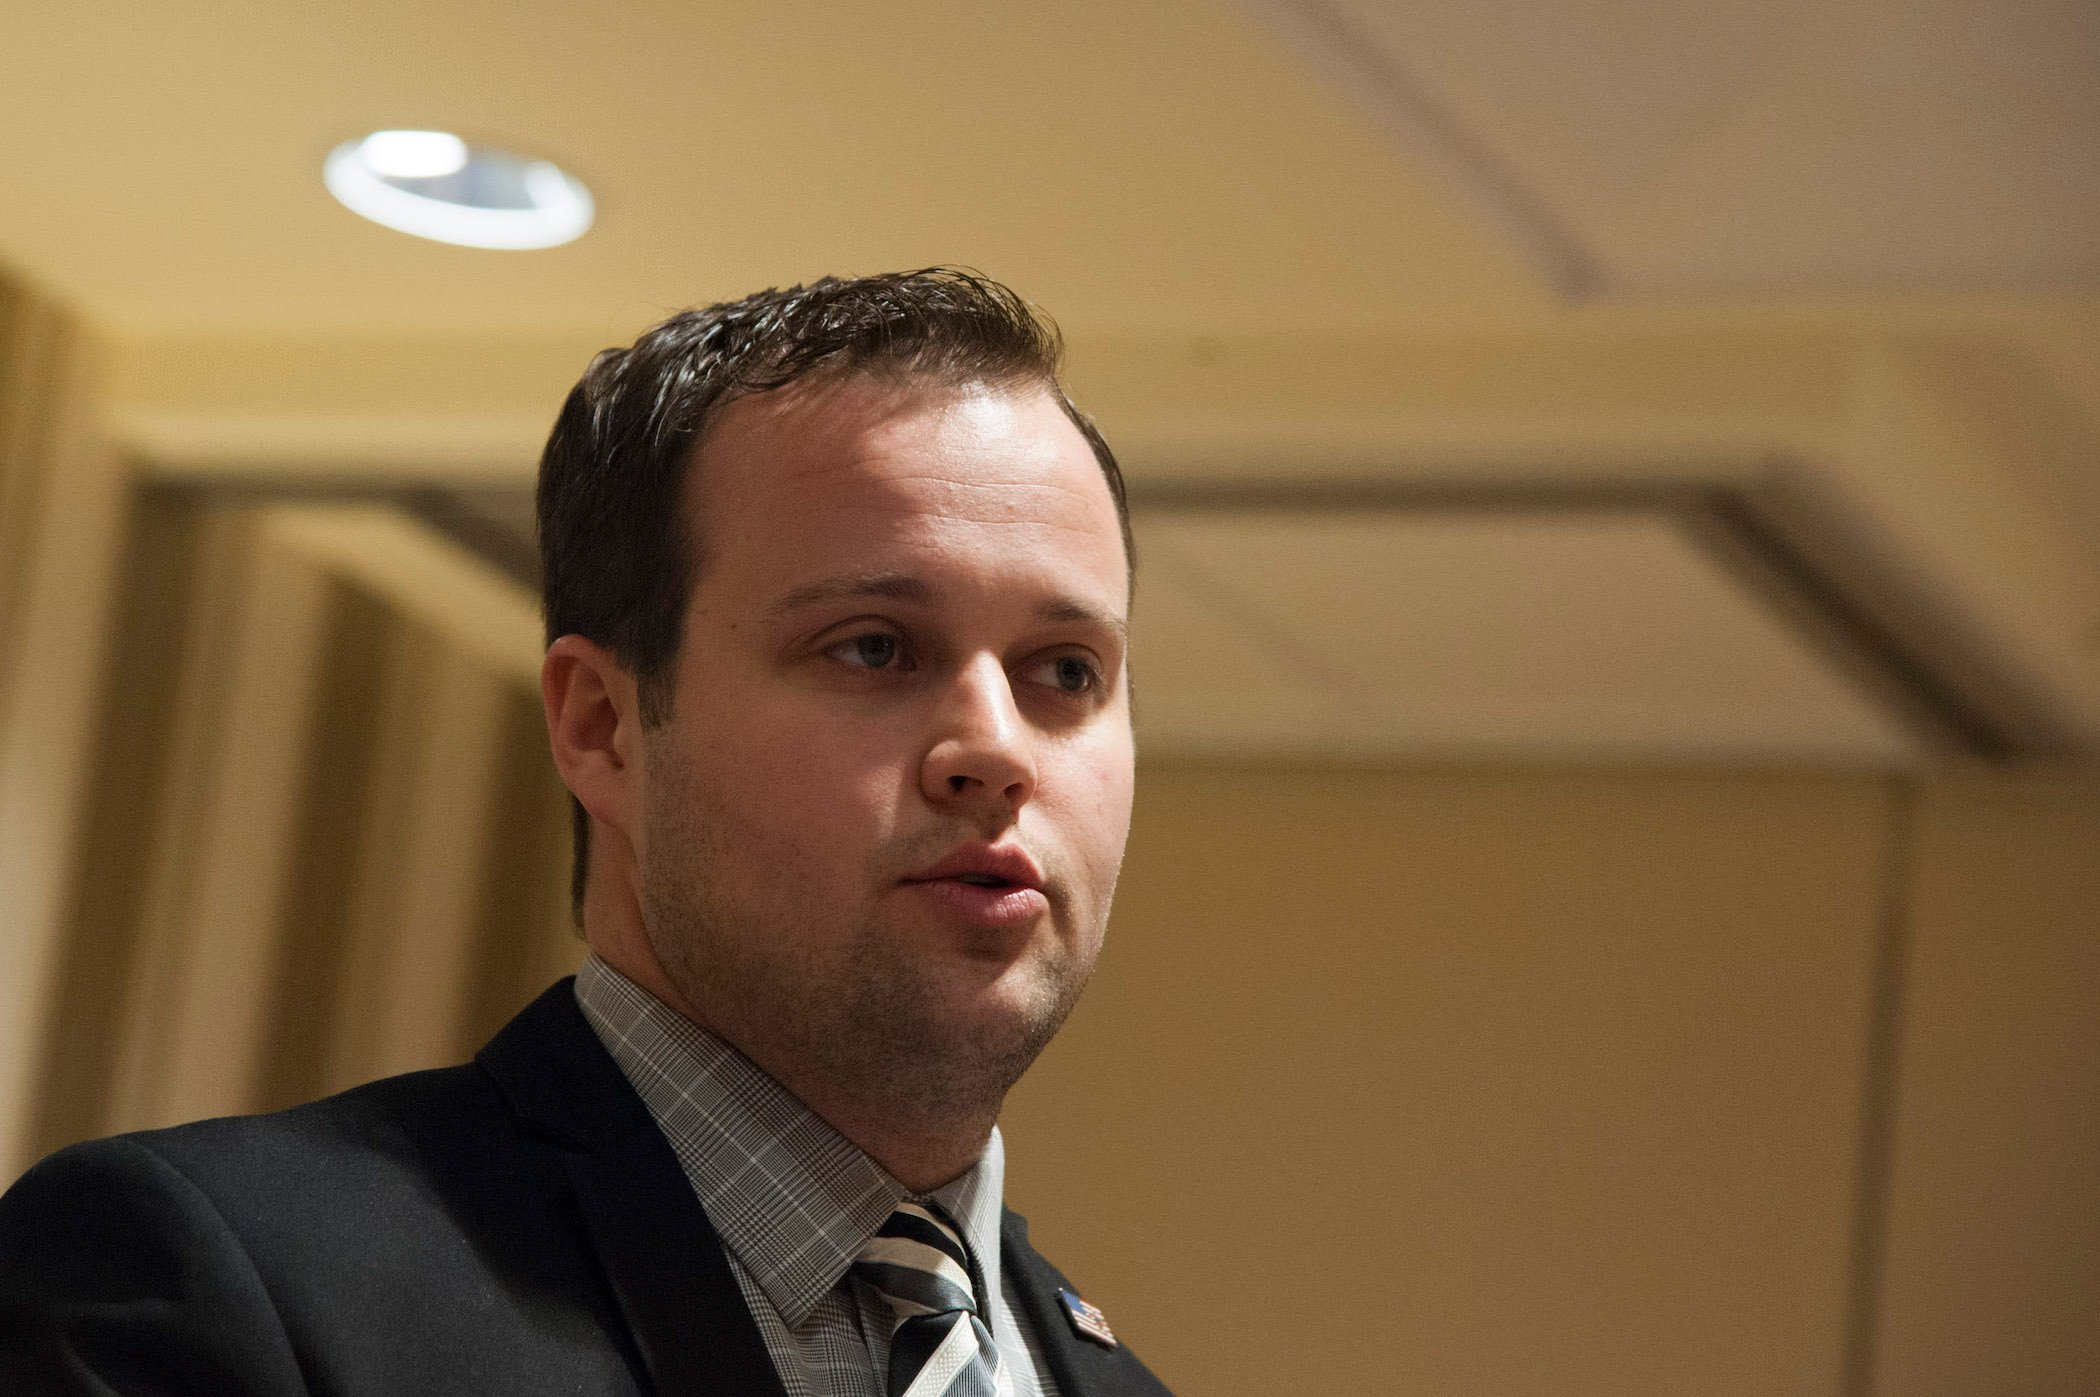 A close-up of Josh Duggar of the Duggar family's face while he's speaking at a conference